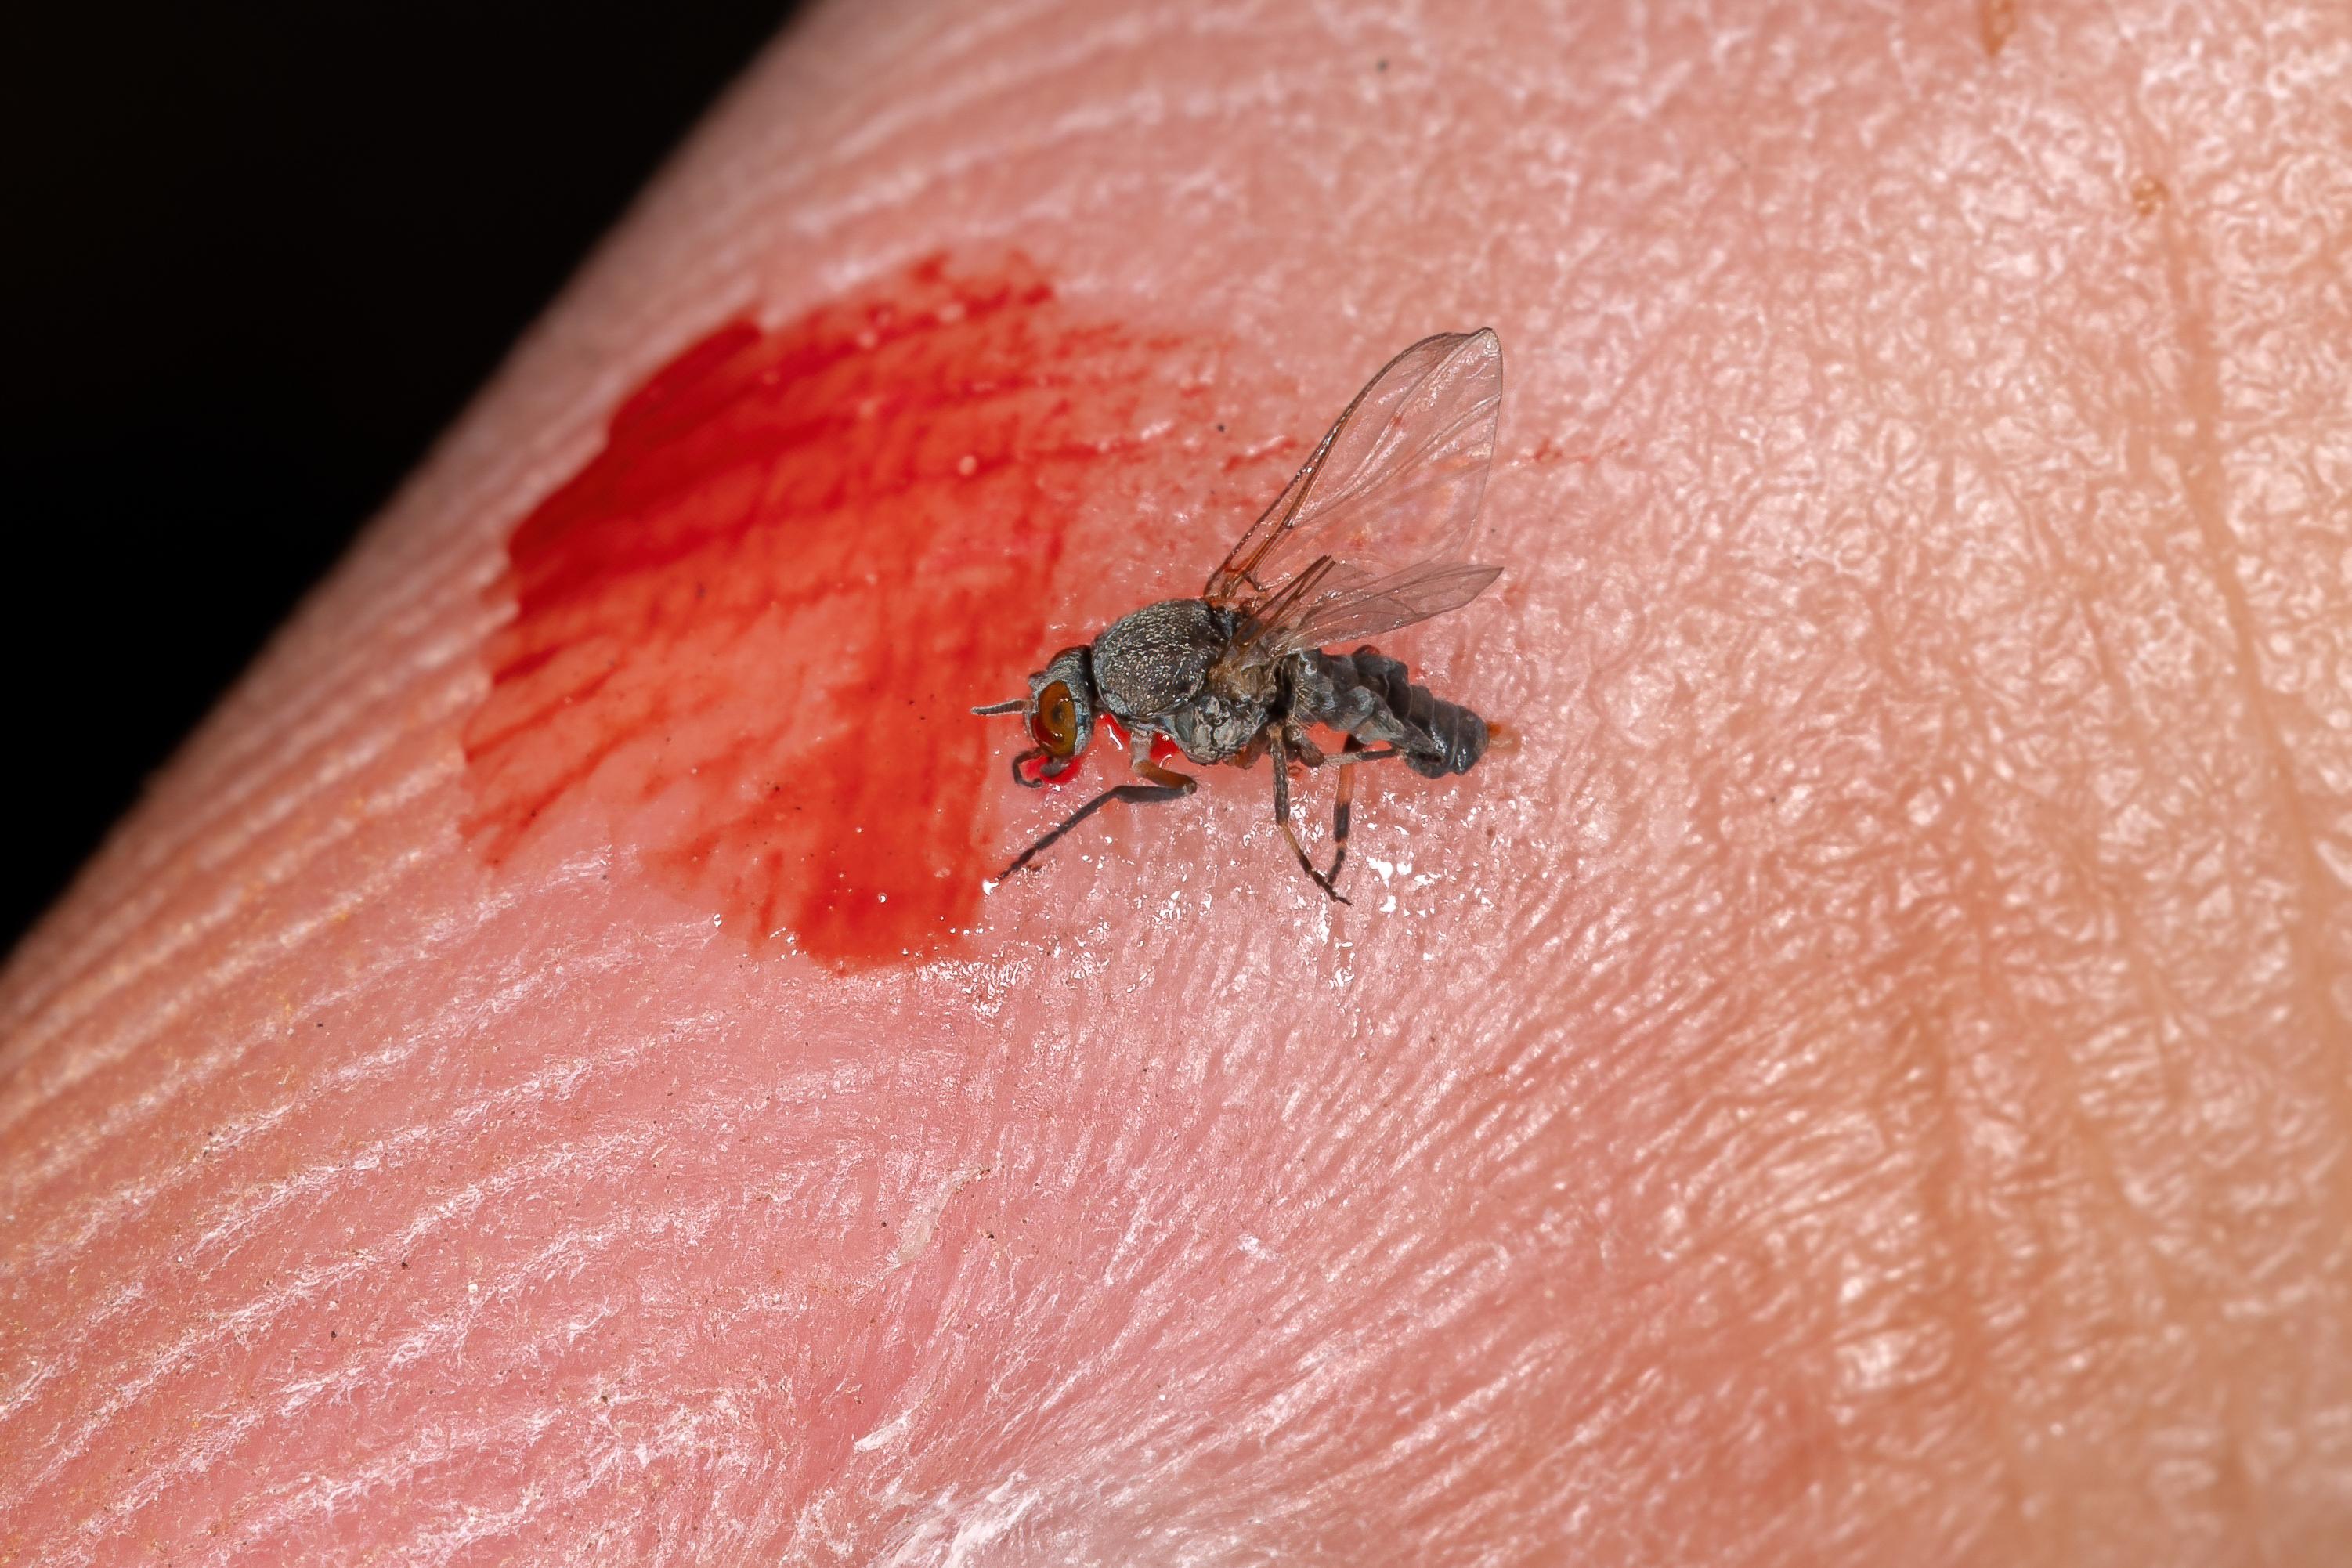 Black flies in Spain: what are the risks in the event of a bite?